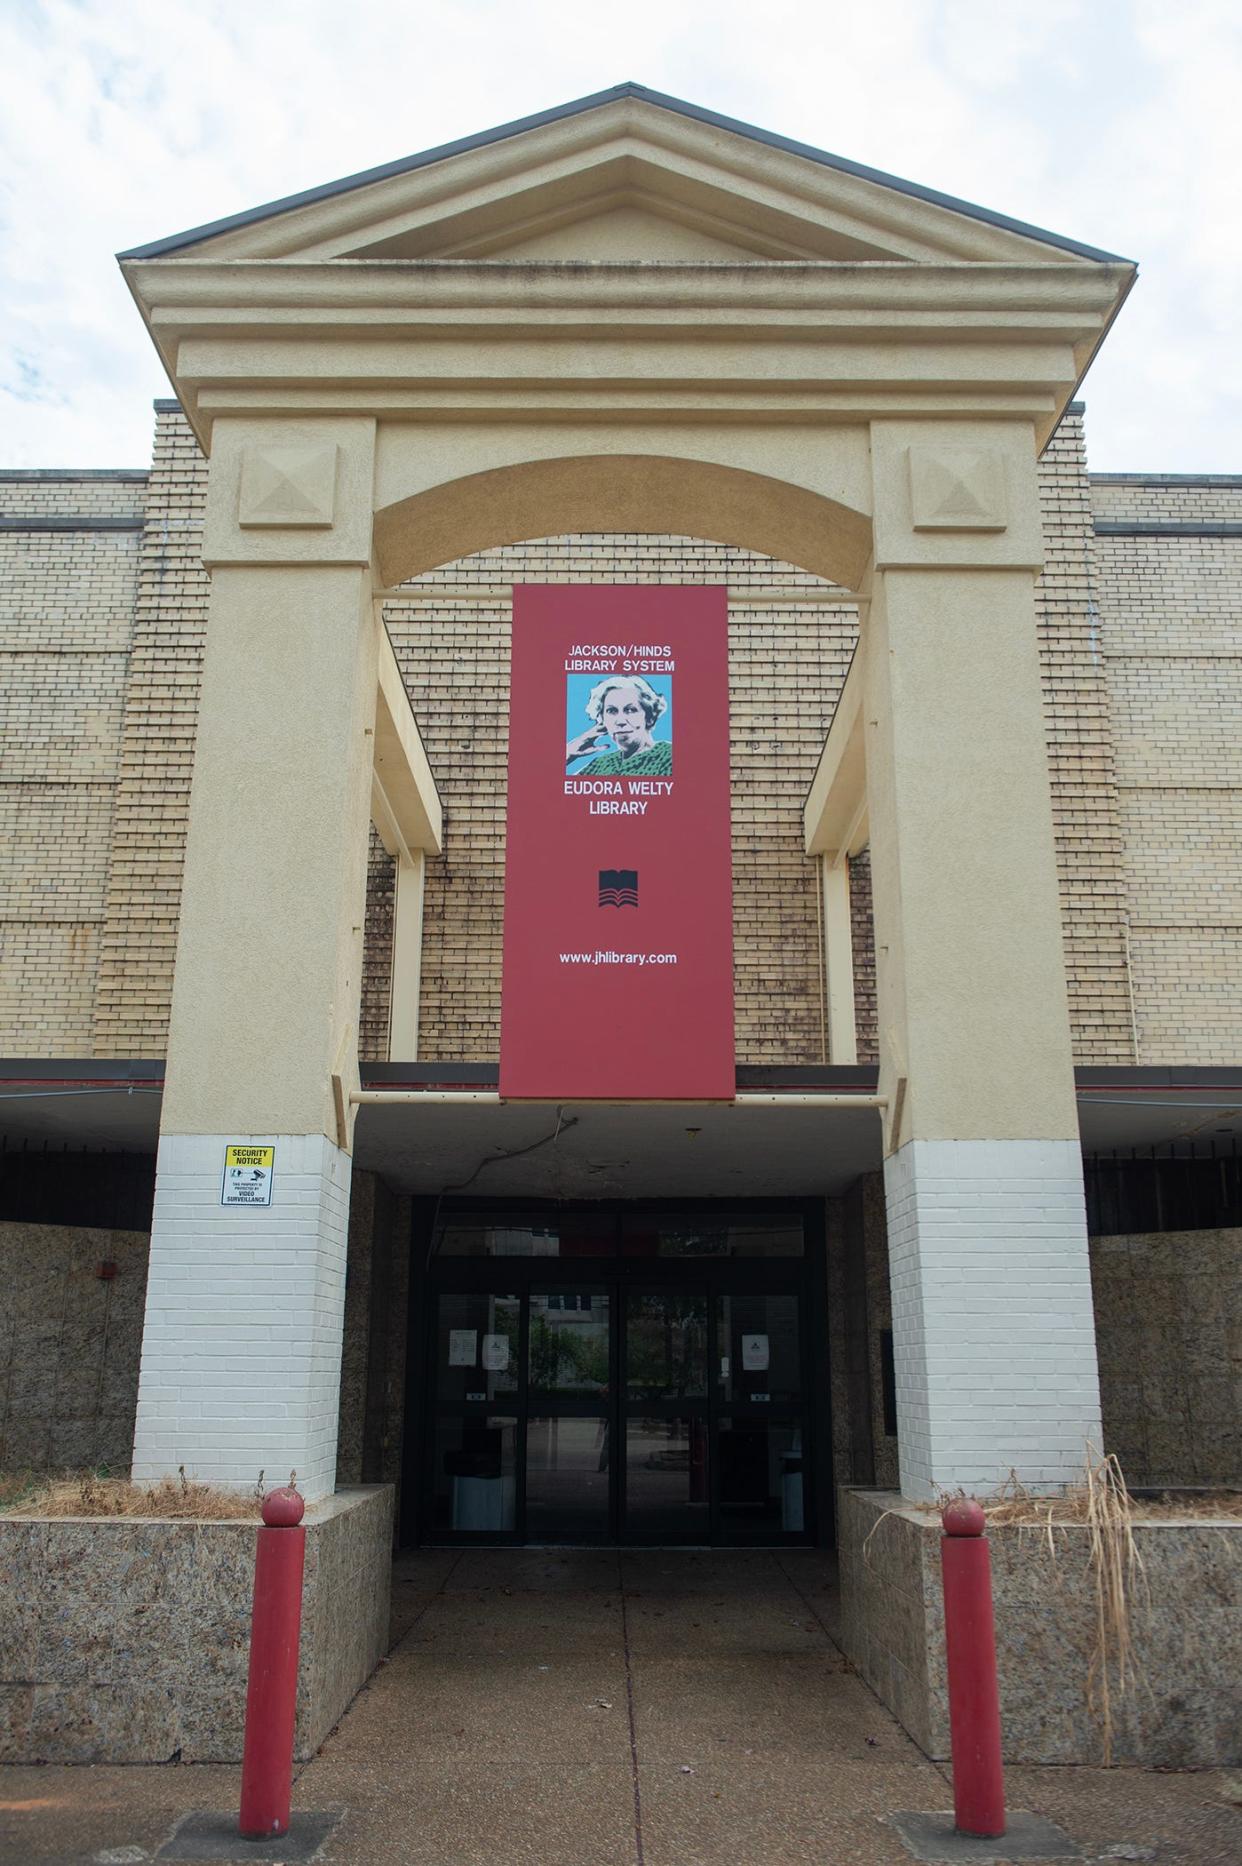 The flagship library of the Jackson-Hinds Library System, the Eudora Welty Library on State Street in Jackson, Miss., sits closed on Wednesday, Sept. 12. City officials announced Monday plans to demolish the facility.